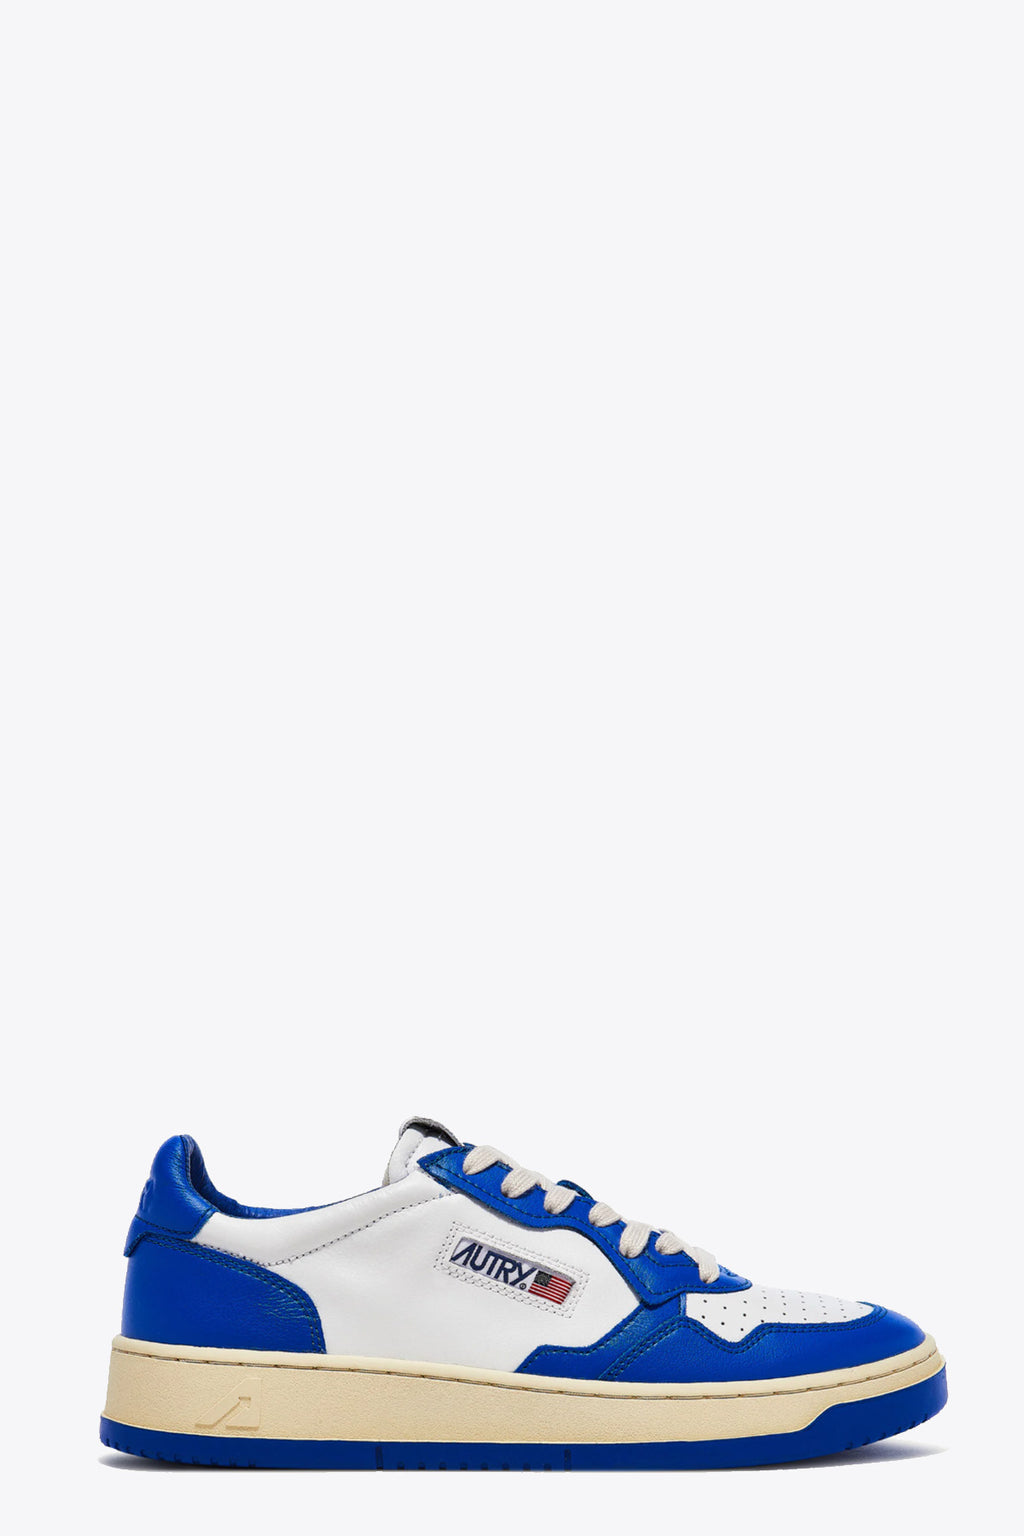 alt-image__Royal-blue-and-white-leather-low-sneaker---Medalist